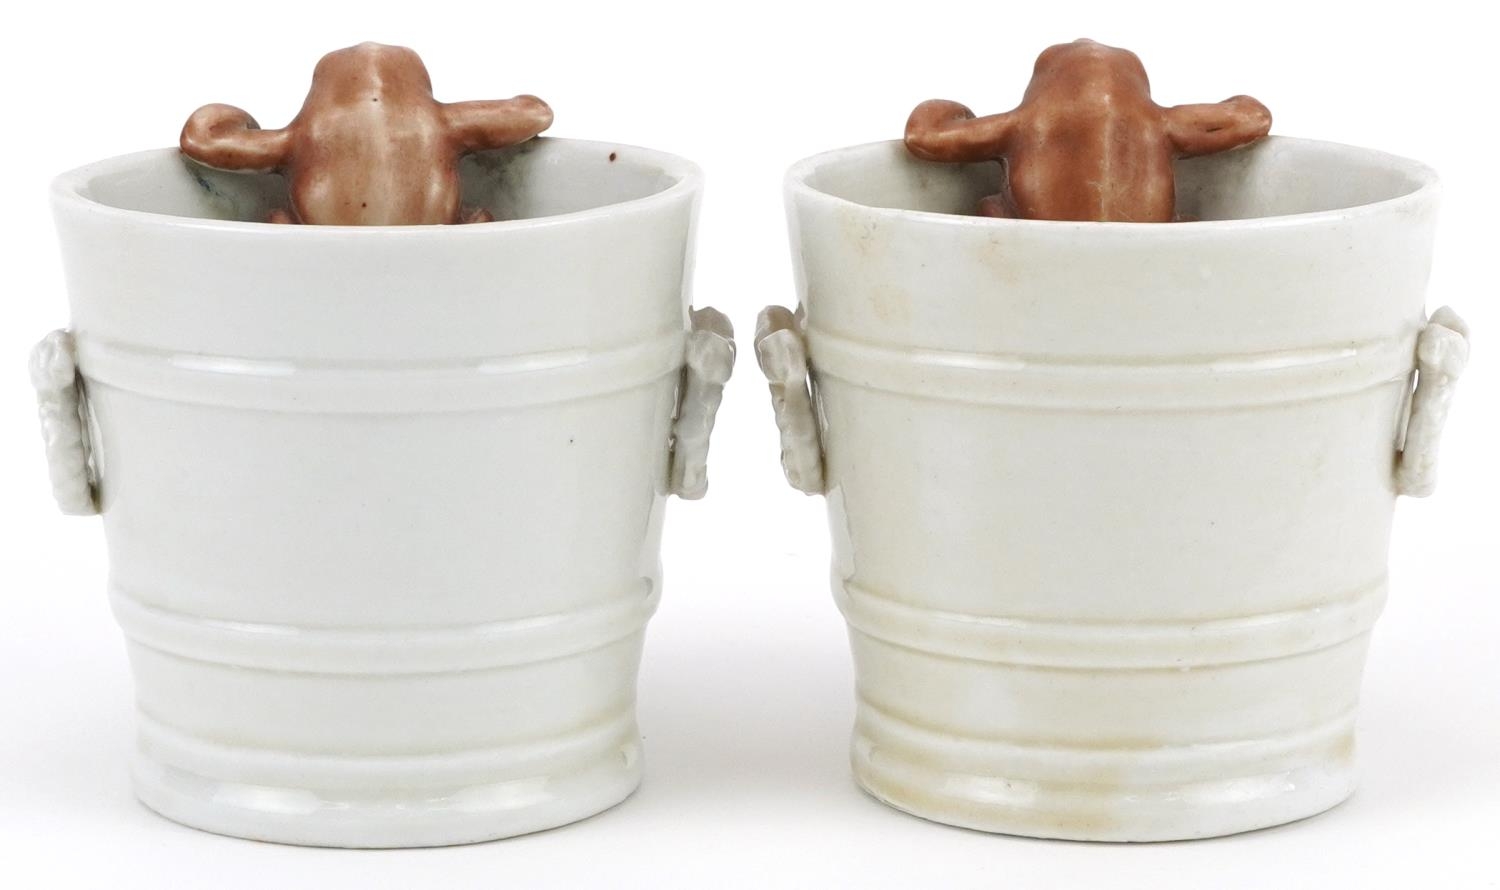 Pair of 19th century continental porcelain comical cache pots in the form of buckets mounted with - Image 3 of 4